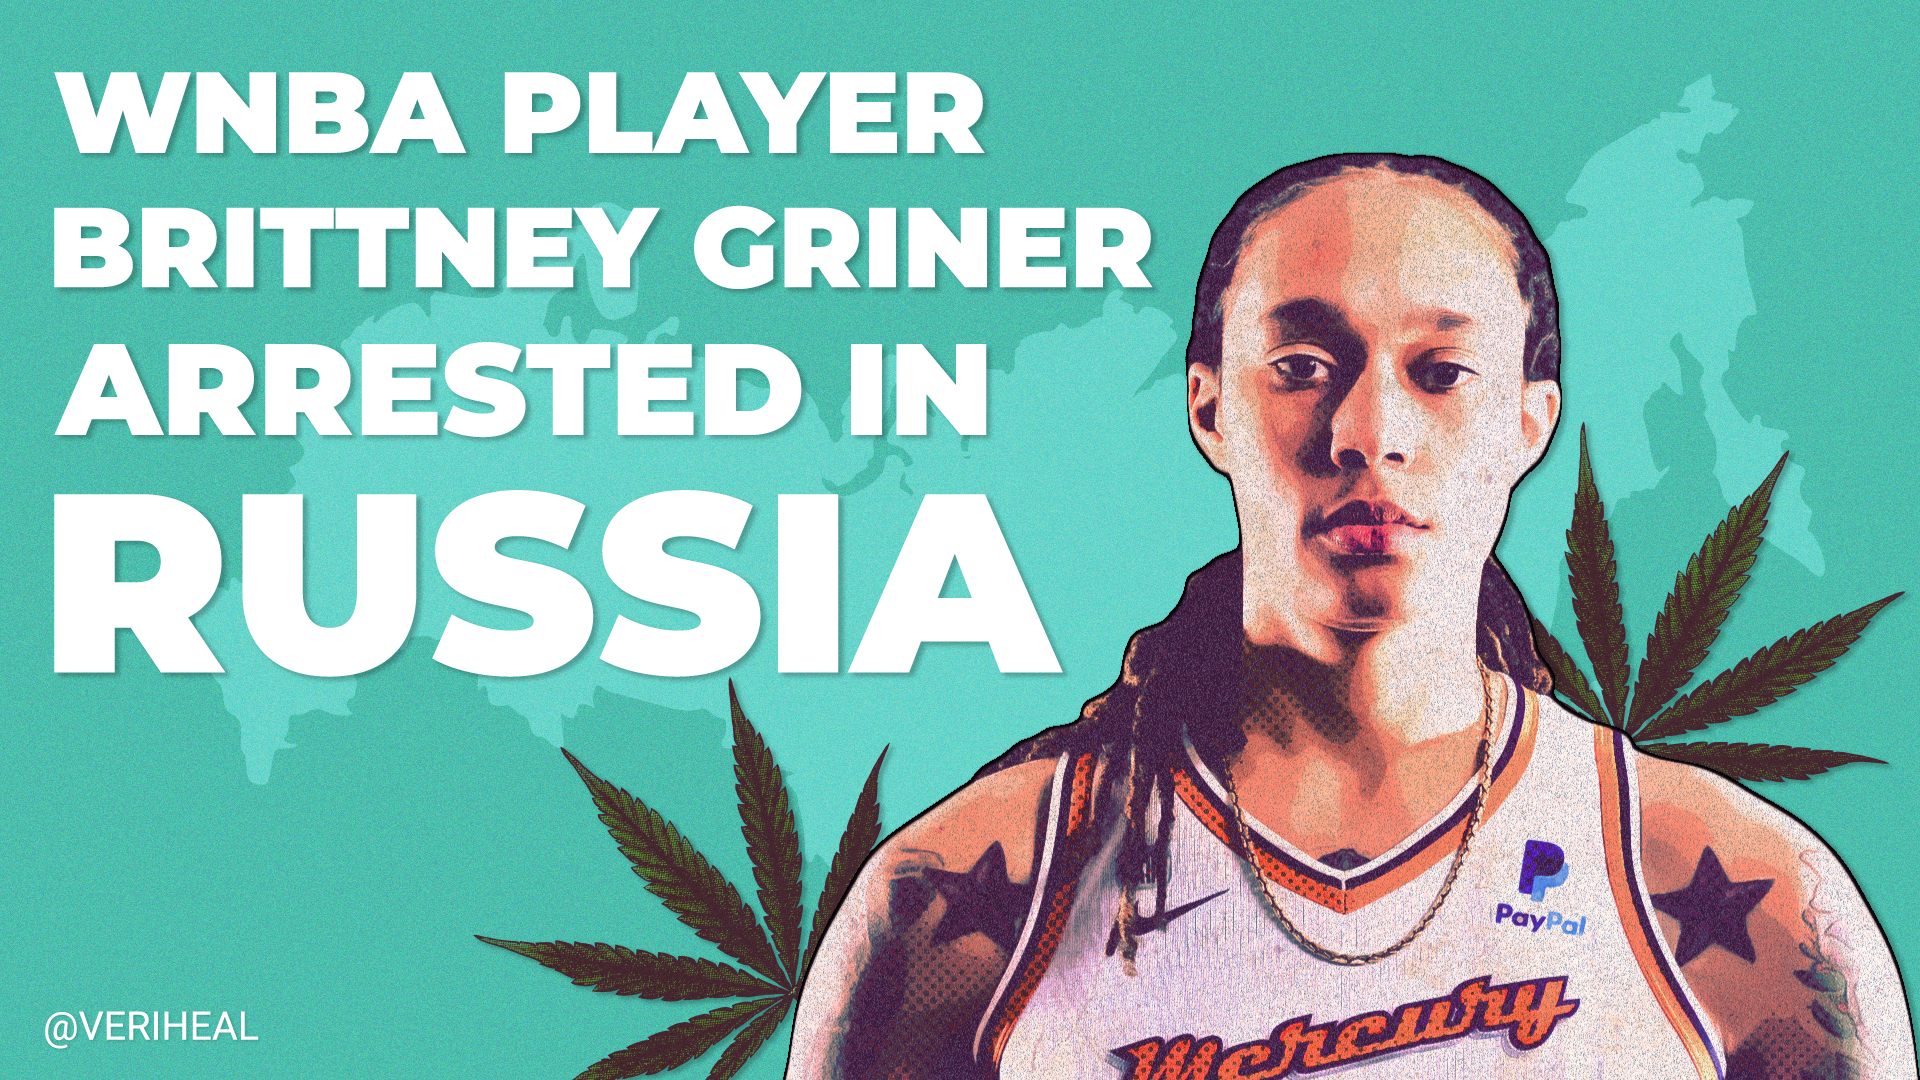 WNBA Star Brittney Griner Arrested in Russia Over Cannabis Oil